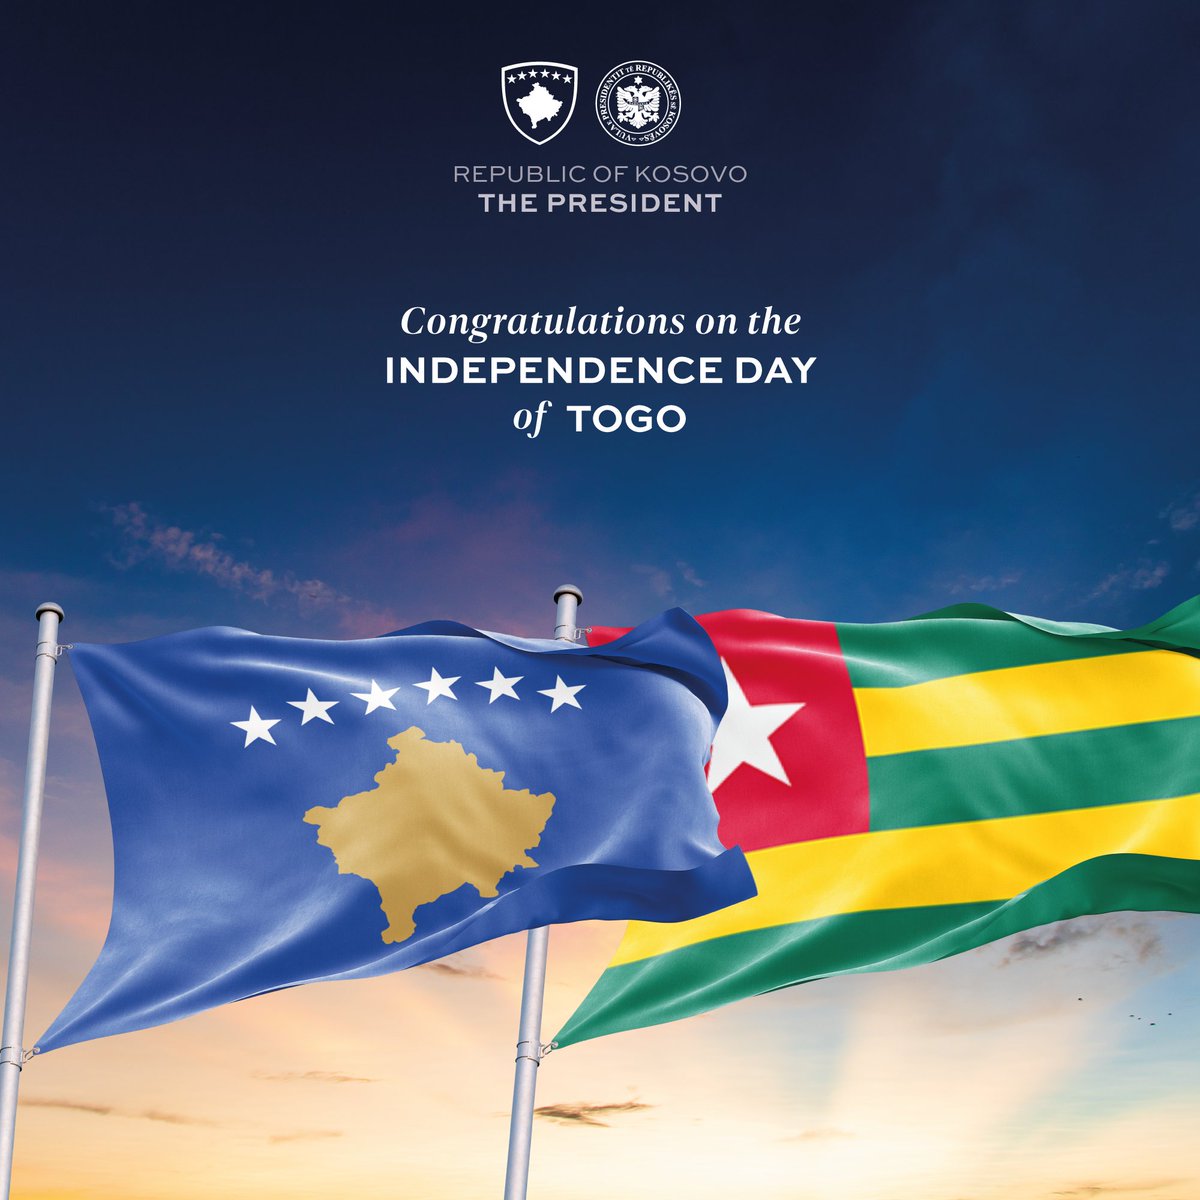 Happy Independence Day to President @FEGnassingbe and the people of Togo! We send our warmest wishes for peace and prosperity. May Togo continue to progress and thrive in the years ahead.